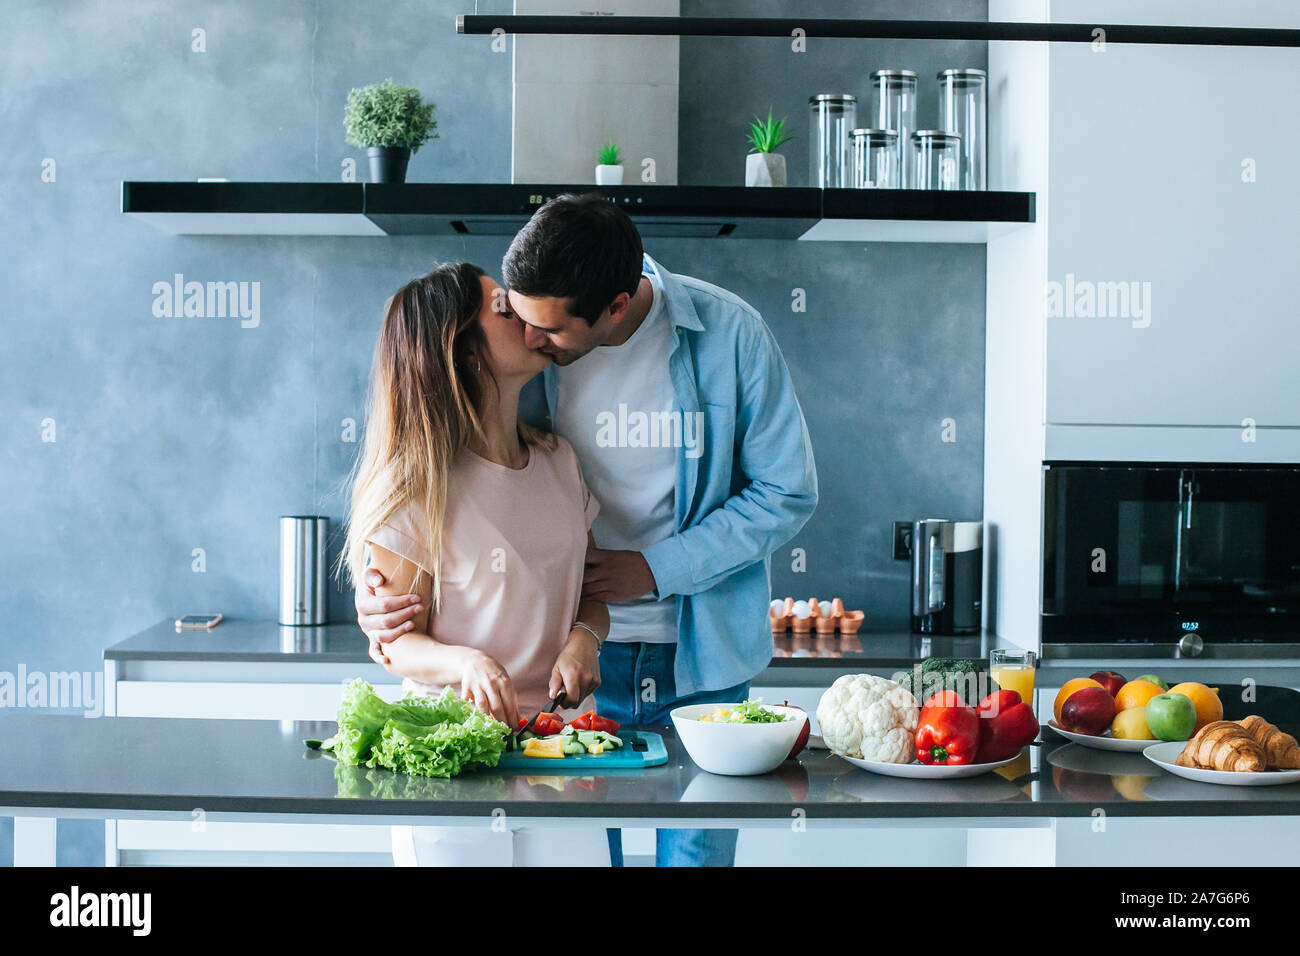 Happy young couple embracing during breakfast in kitchen Stock Photo